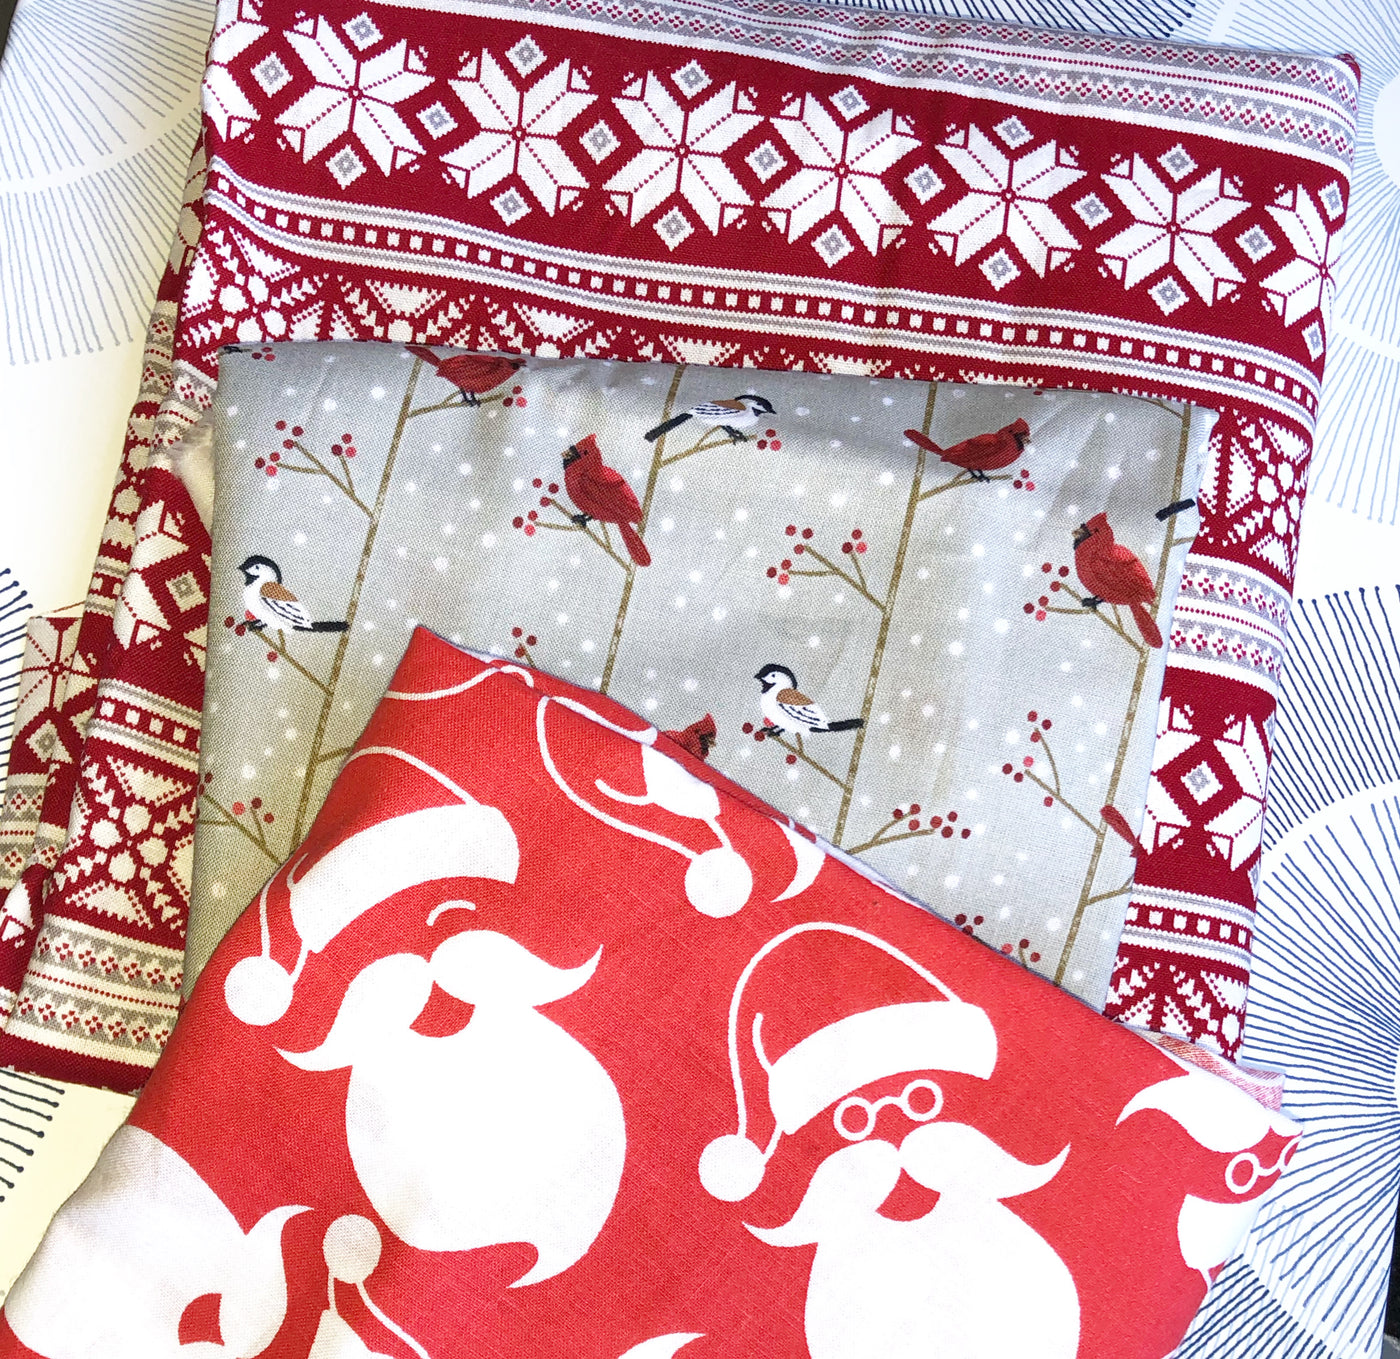 Cotton Face Mask - HOLIDAY FABRIC